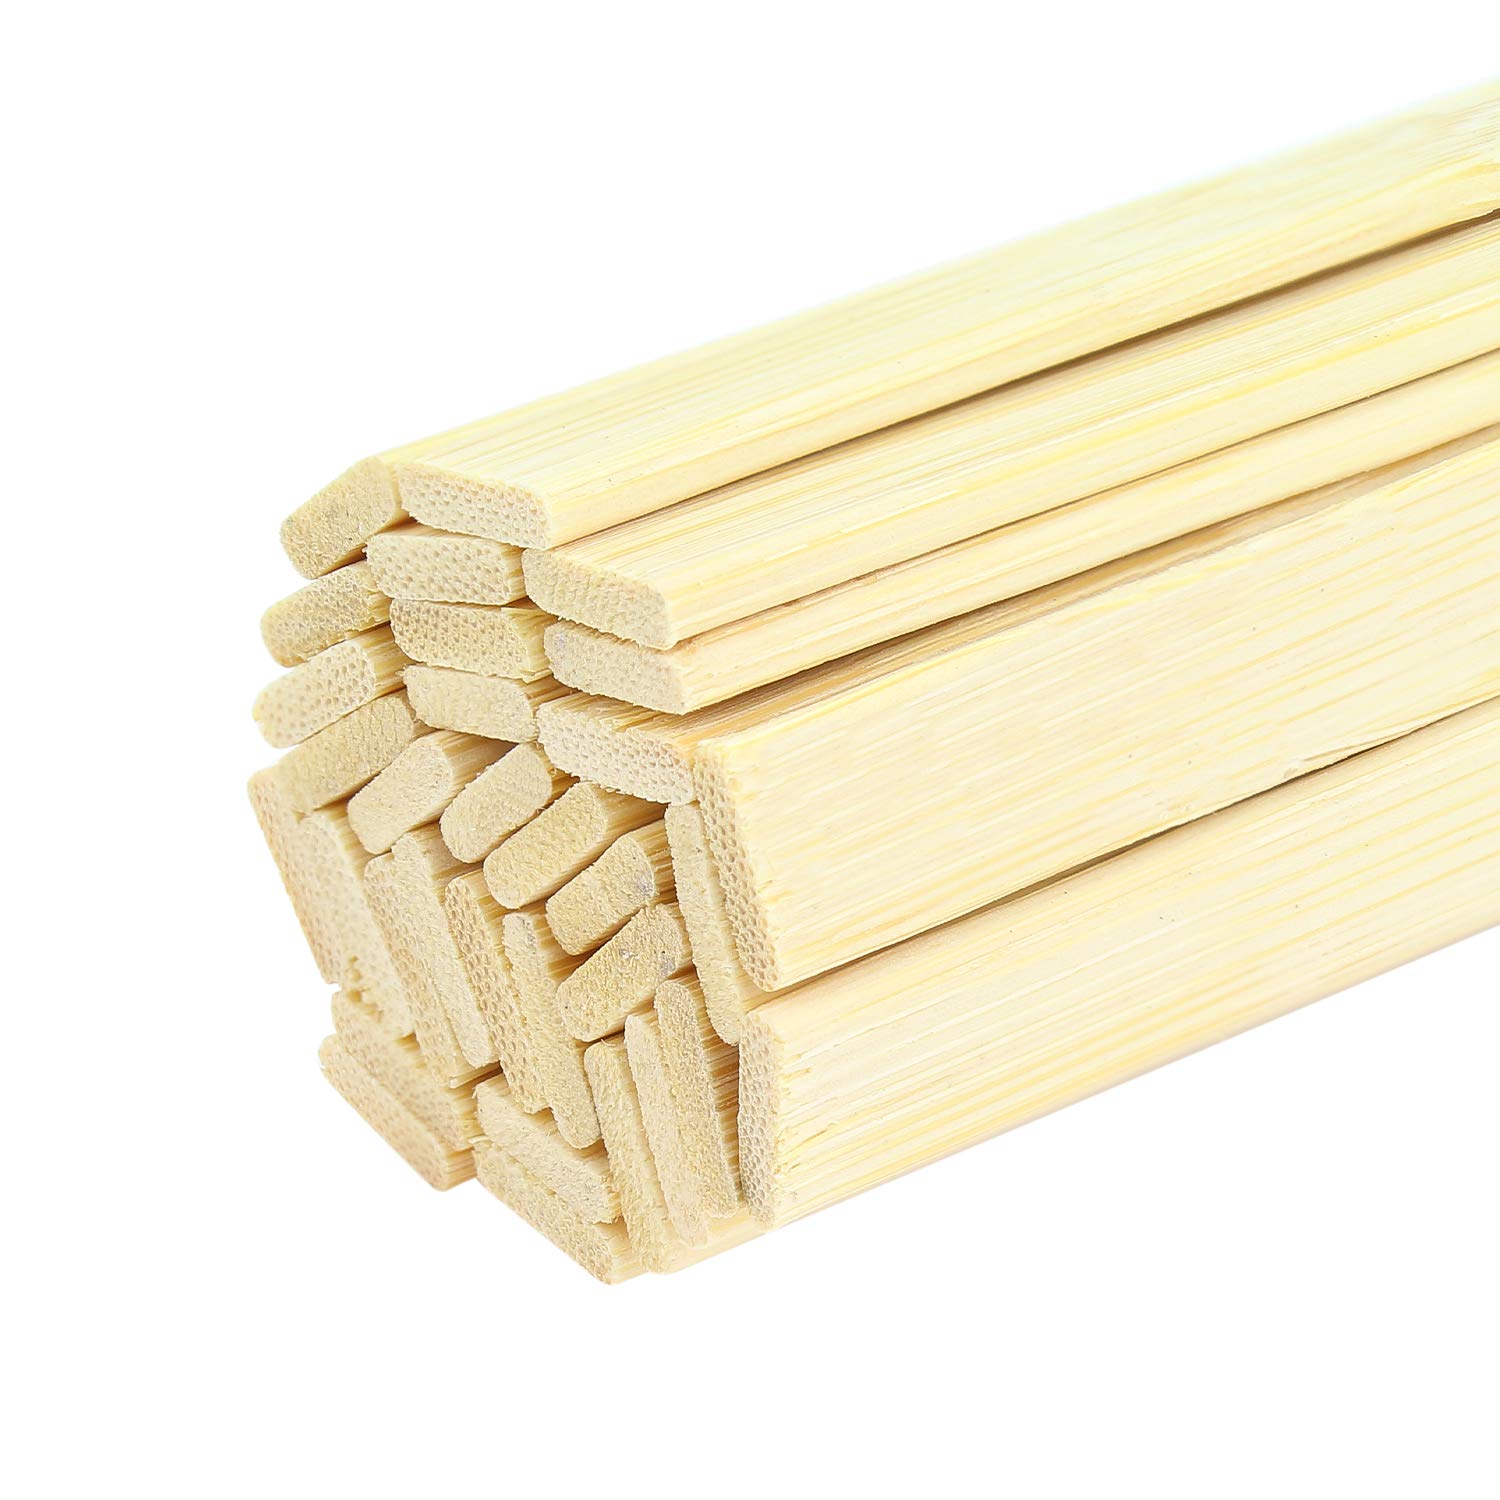 Favordrory 11.8 inches Wood Craft Sticks Natural Bamboo Sticks